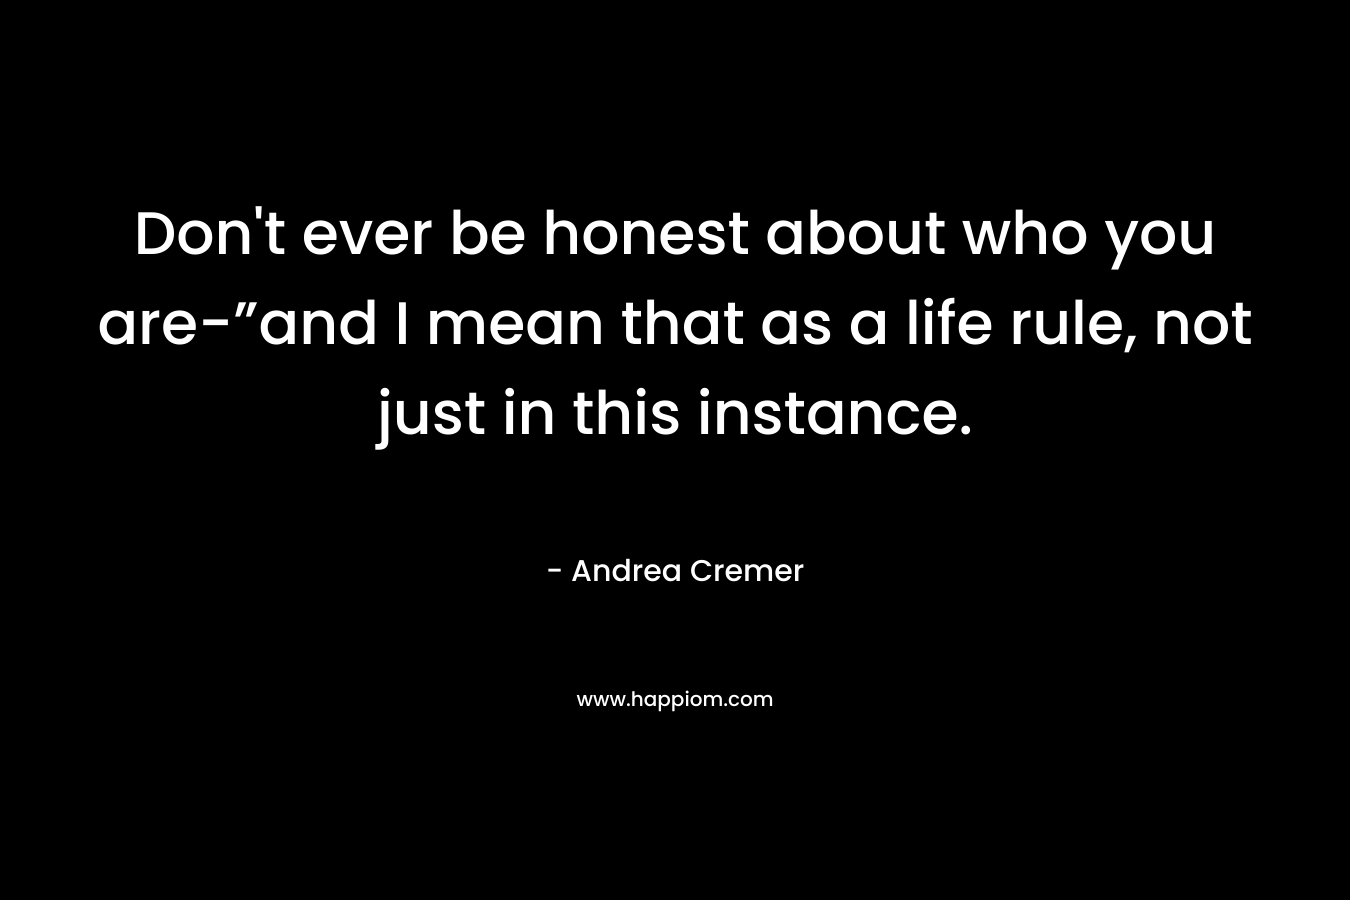 Don't ever be honest about who you are-”and I mean that as a life rule, not just in this instance.